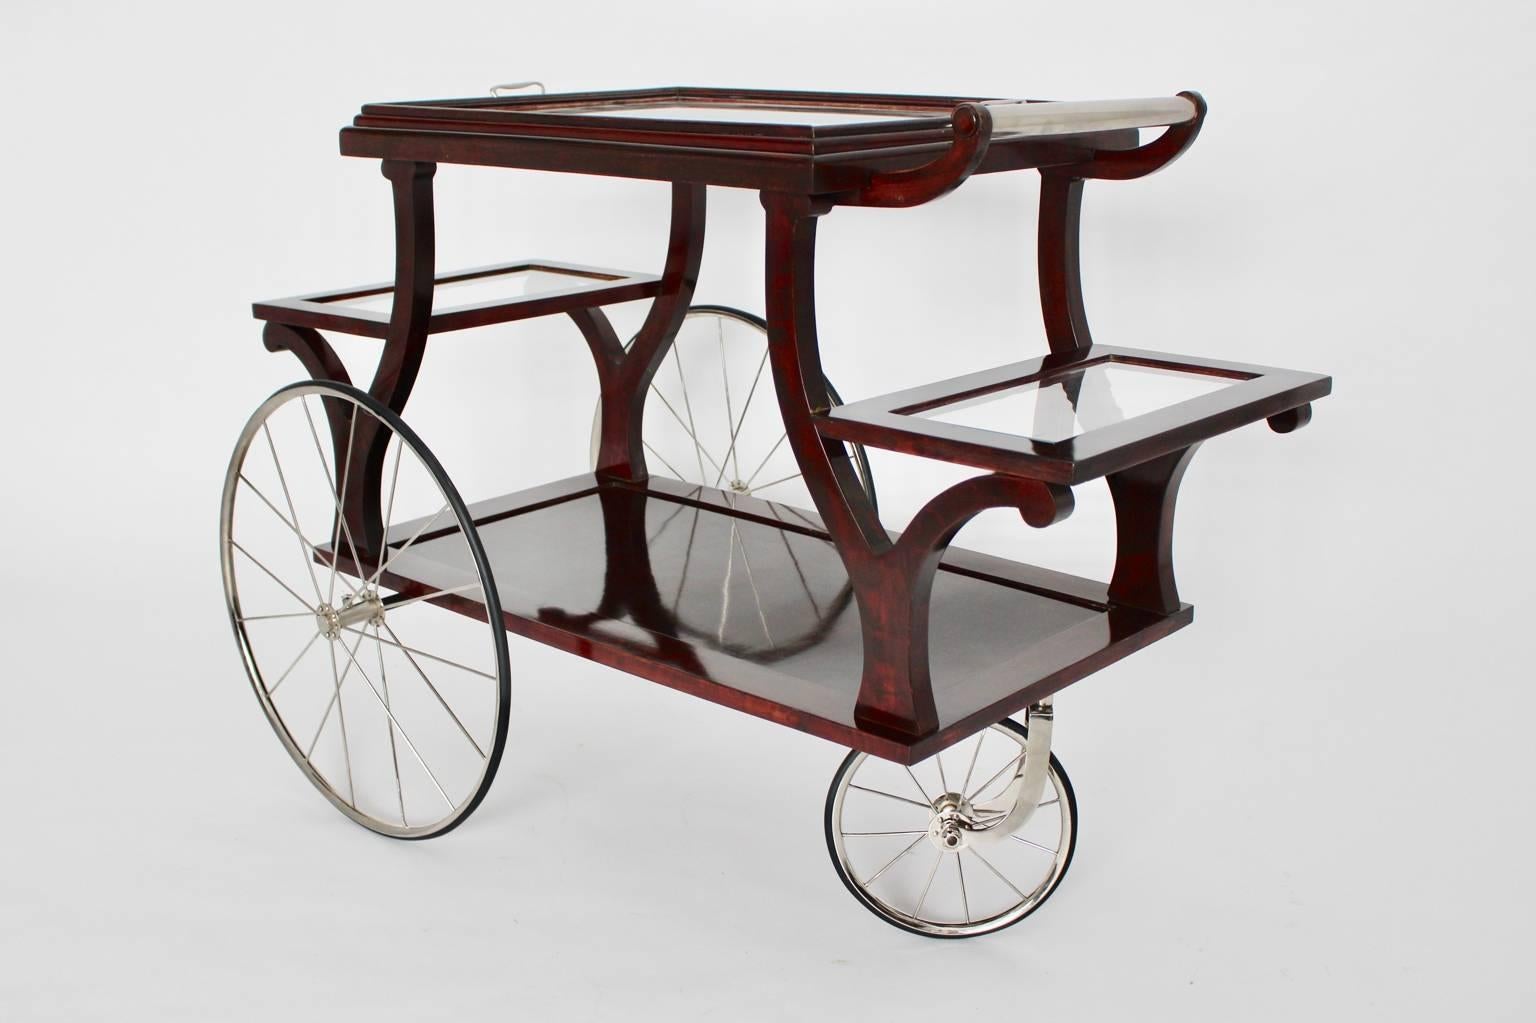 Jugendstil bar cart from stained beech designed and executed, circa 1902 in Vienna.
This type of bar cart was used by Adolf Loos for his interiors.
It features three nickel-plated spoke wheels with rubber and nickel-plated fittings.
The base is made